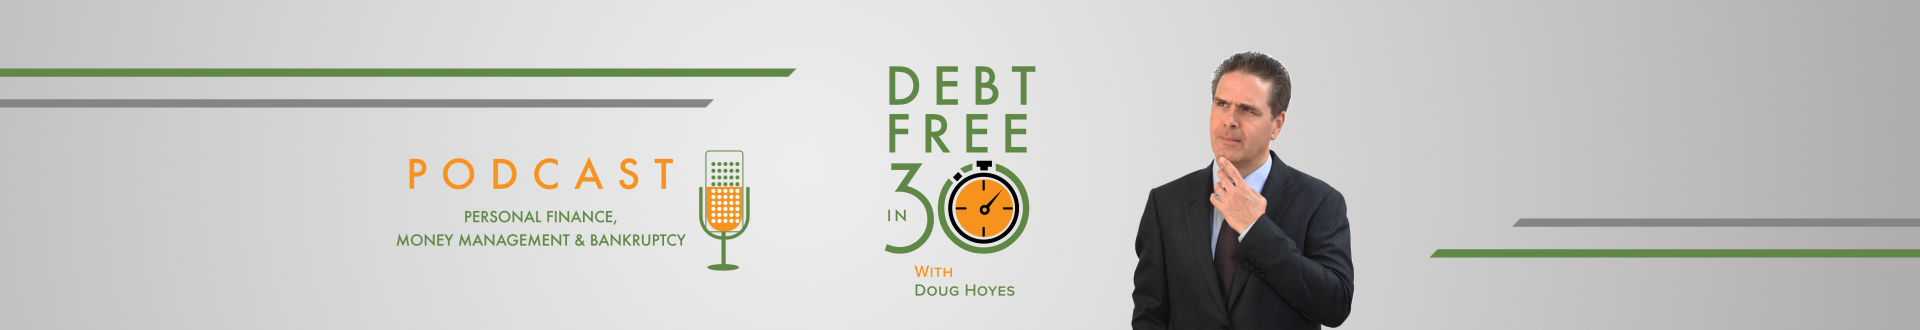 Debt Free in 30 Podcast Archive - Page 36